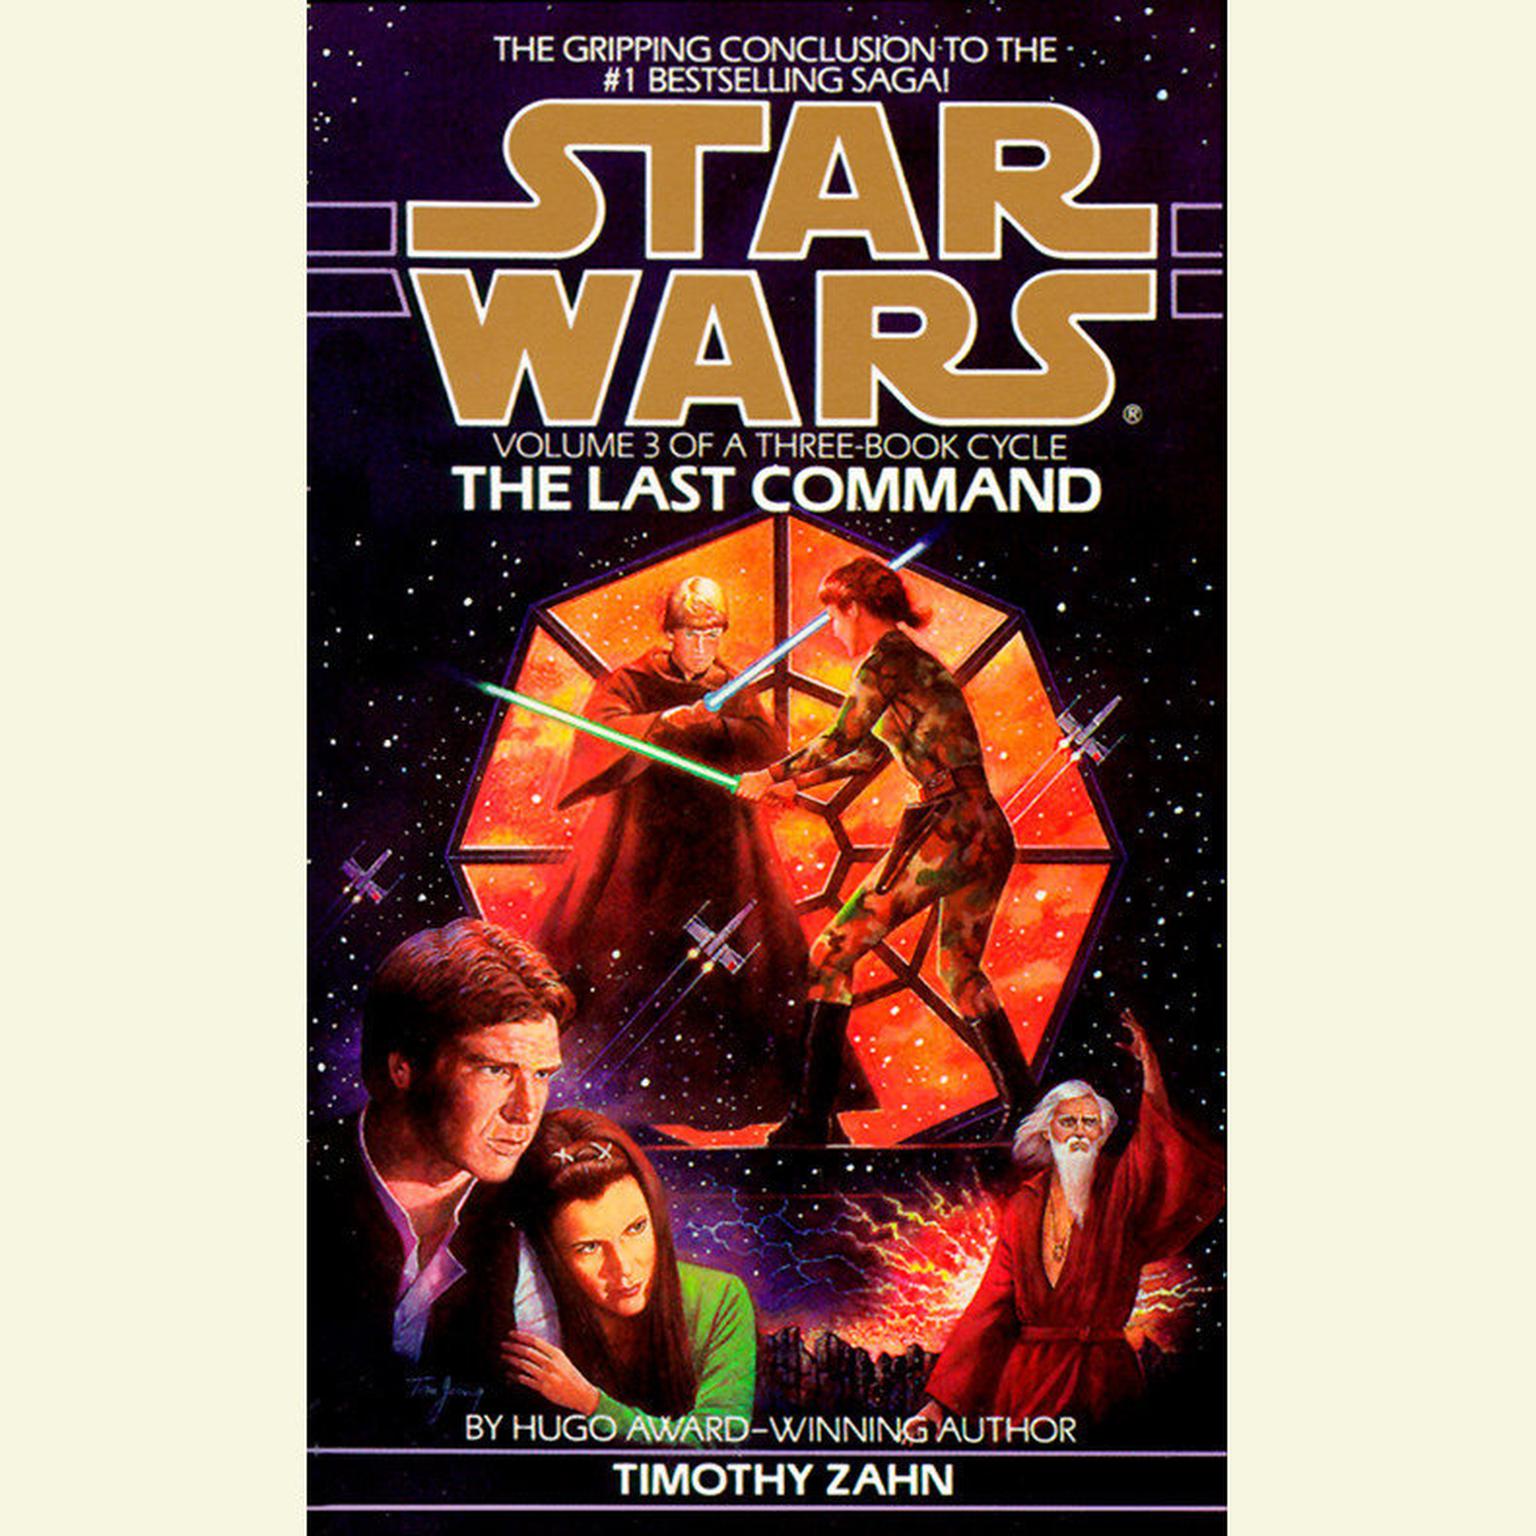 The Last Command: Star Wars Legends (The Thrawn Trilogy): Volume 3 Audiobook, by Timothy Zahn